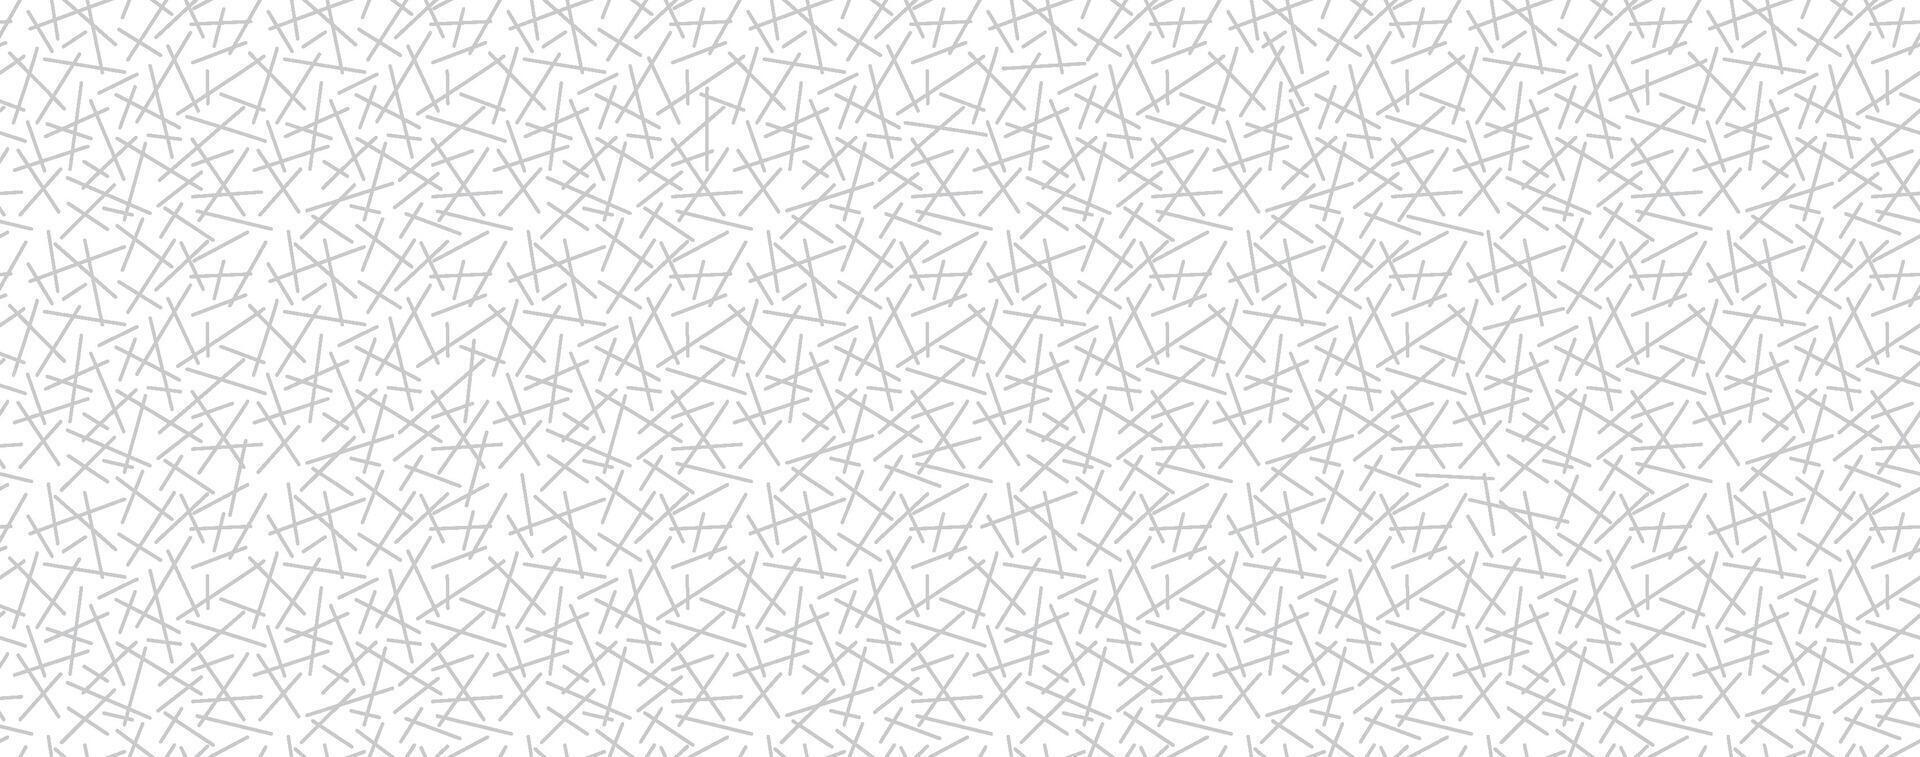 Horizontally And Vertically Seamless Abstract Vector Pattern Illustration Isolated On A White Background.